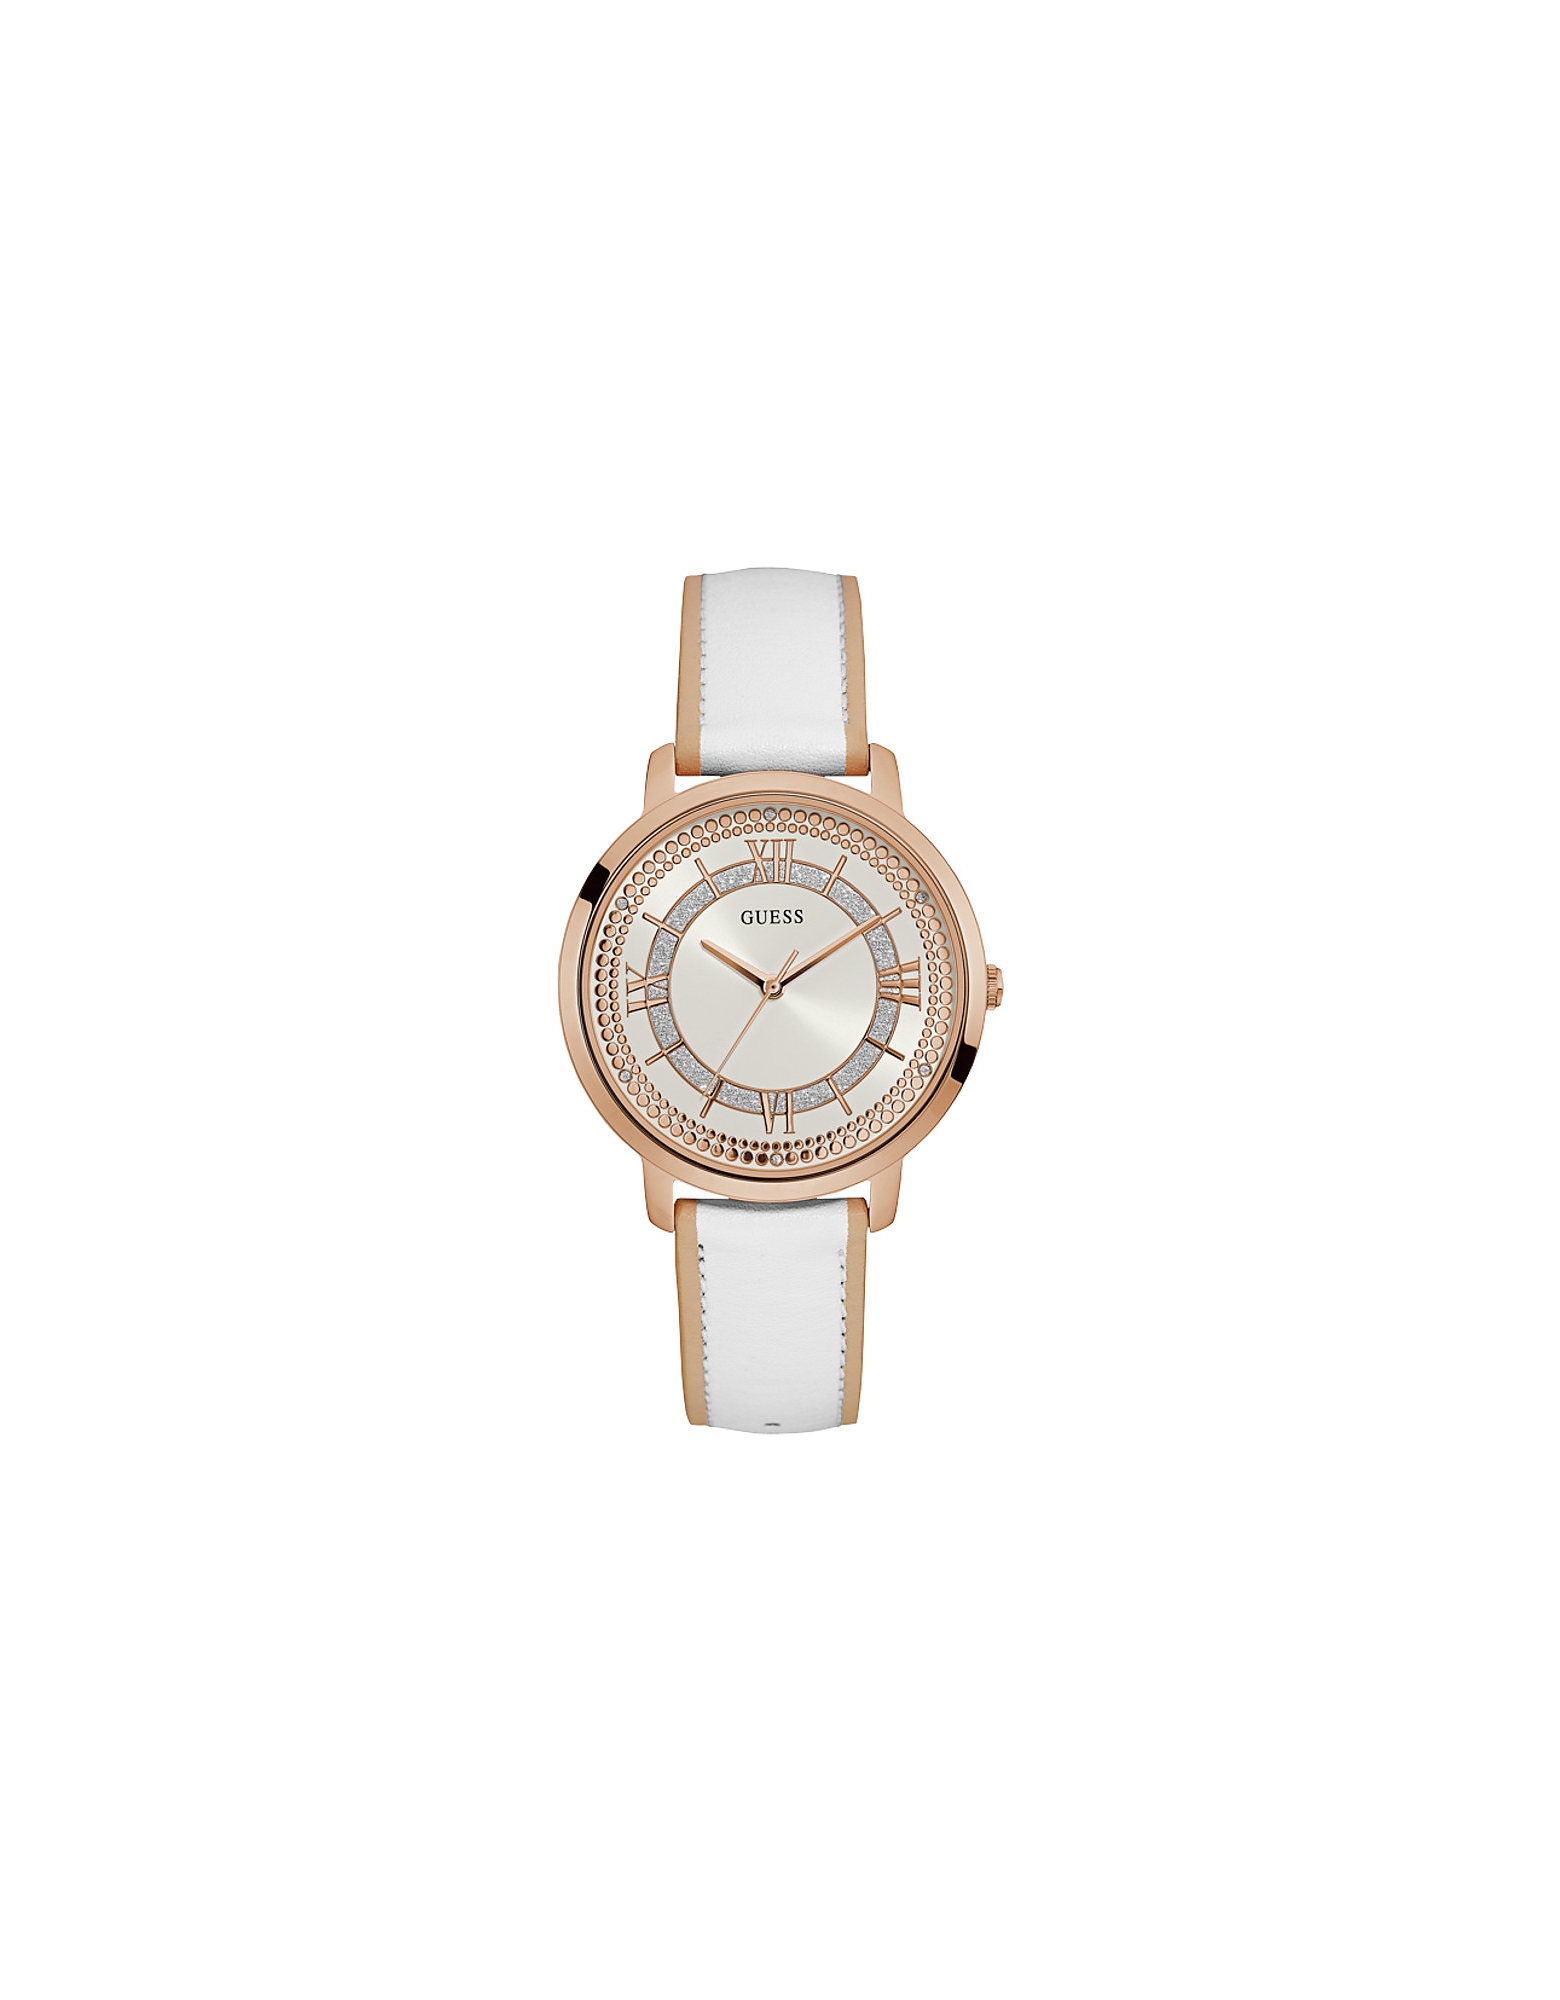 Guess Designer Women's Watches In White